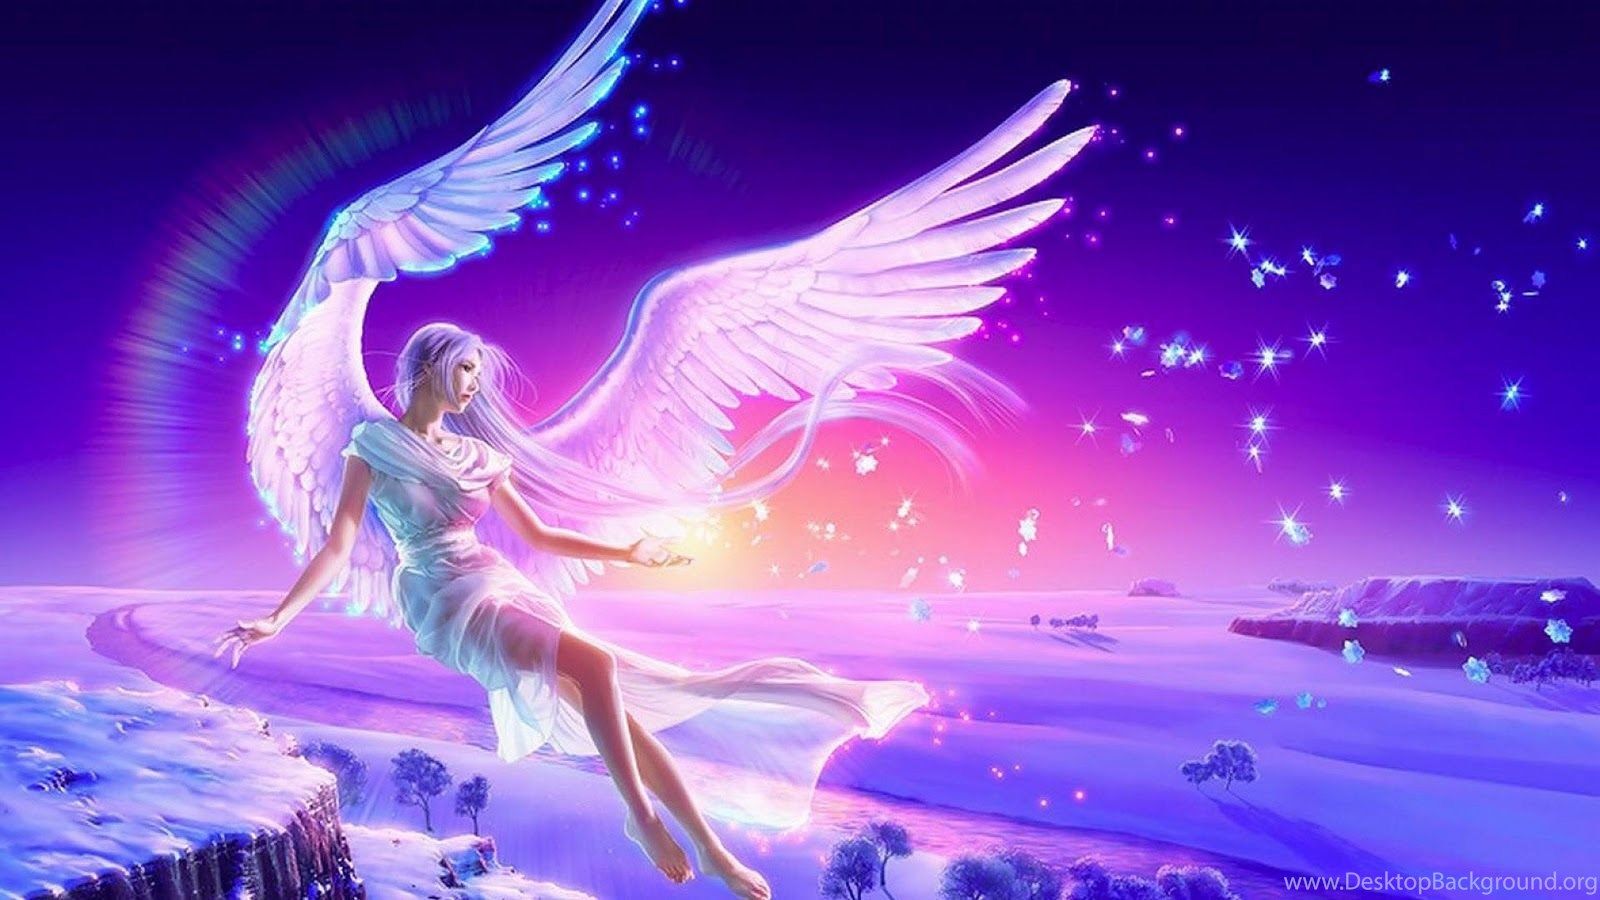 Angel Wings Images  Free Photos PNG Stickers Wallpapers  Backgrounds   rawpixel